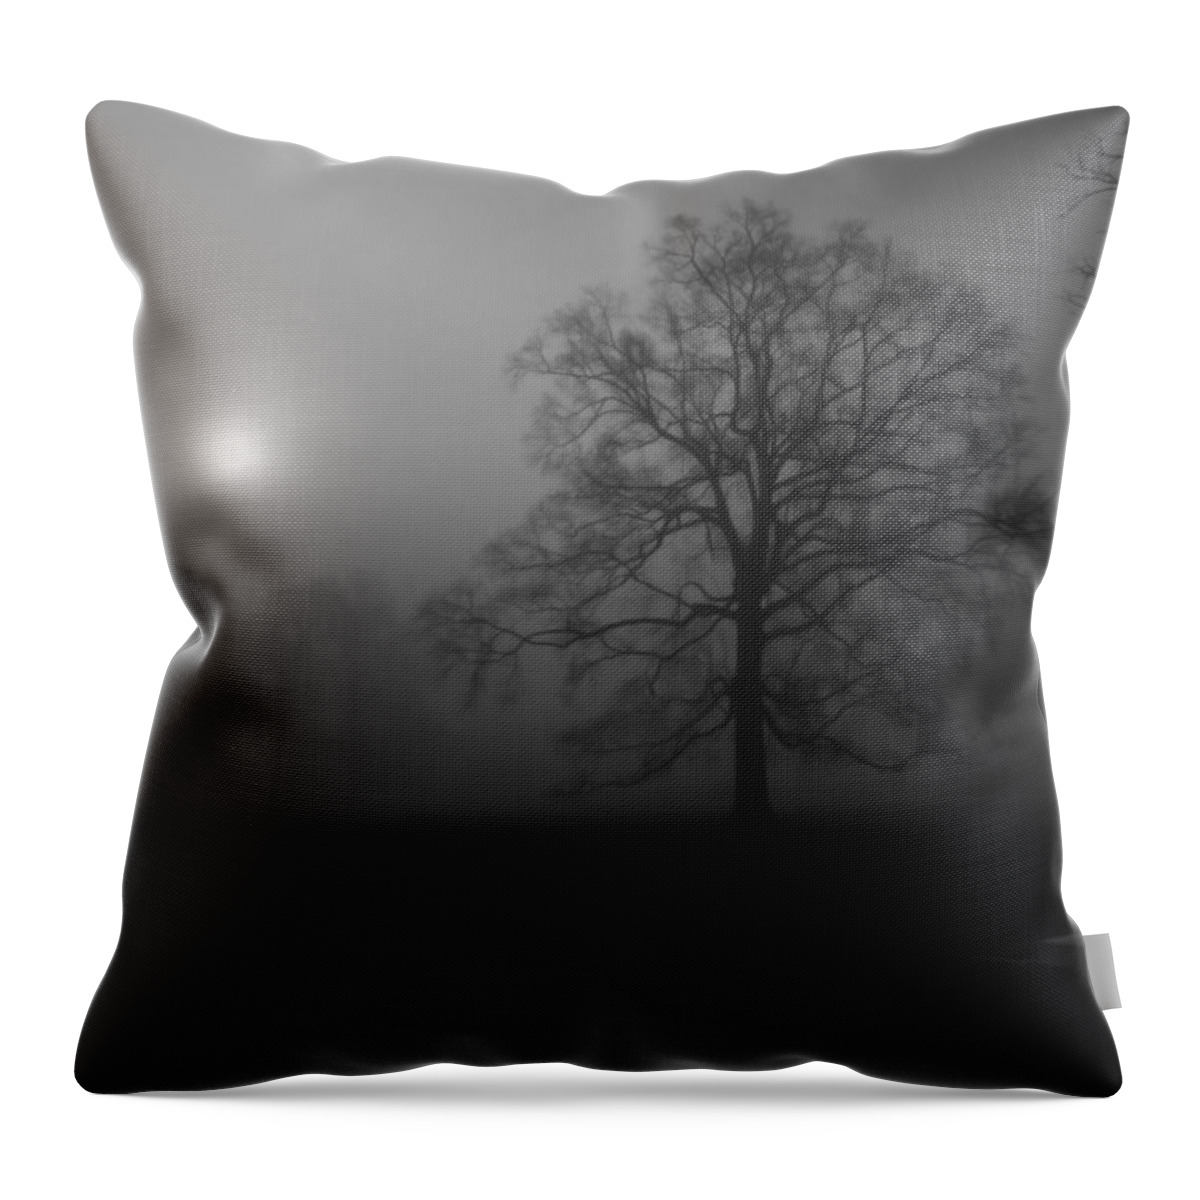 Landscape Throw Pillow featuring the photograph Winter Oak in Fog by Deborah Smith